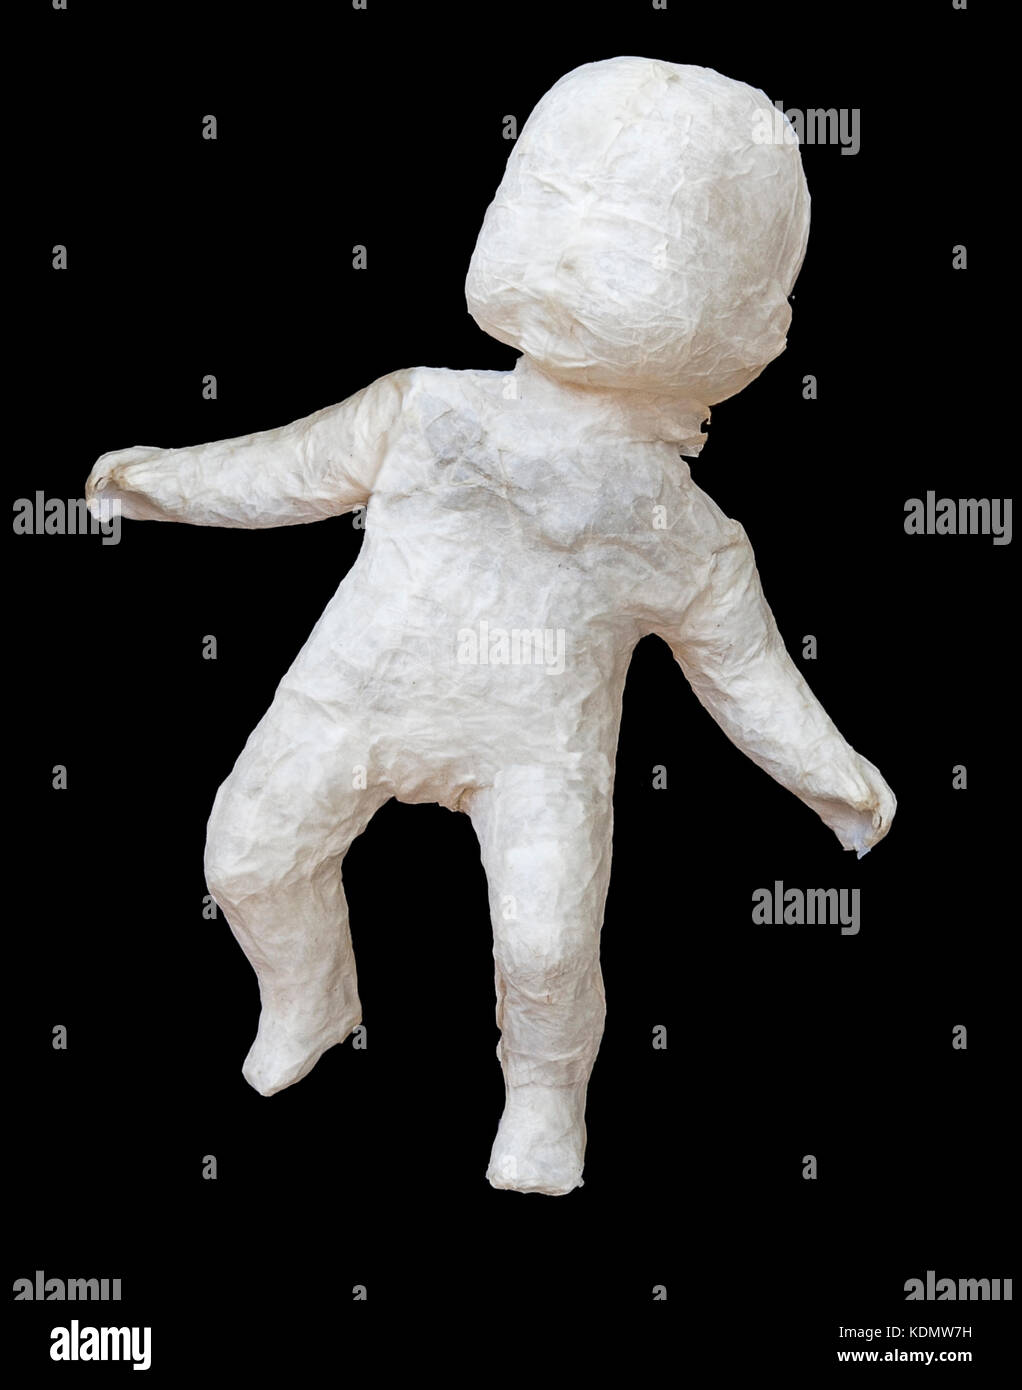 Paper mache infant doll on black background. Stock Photo